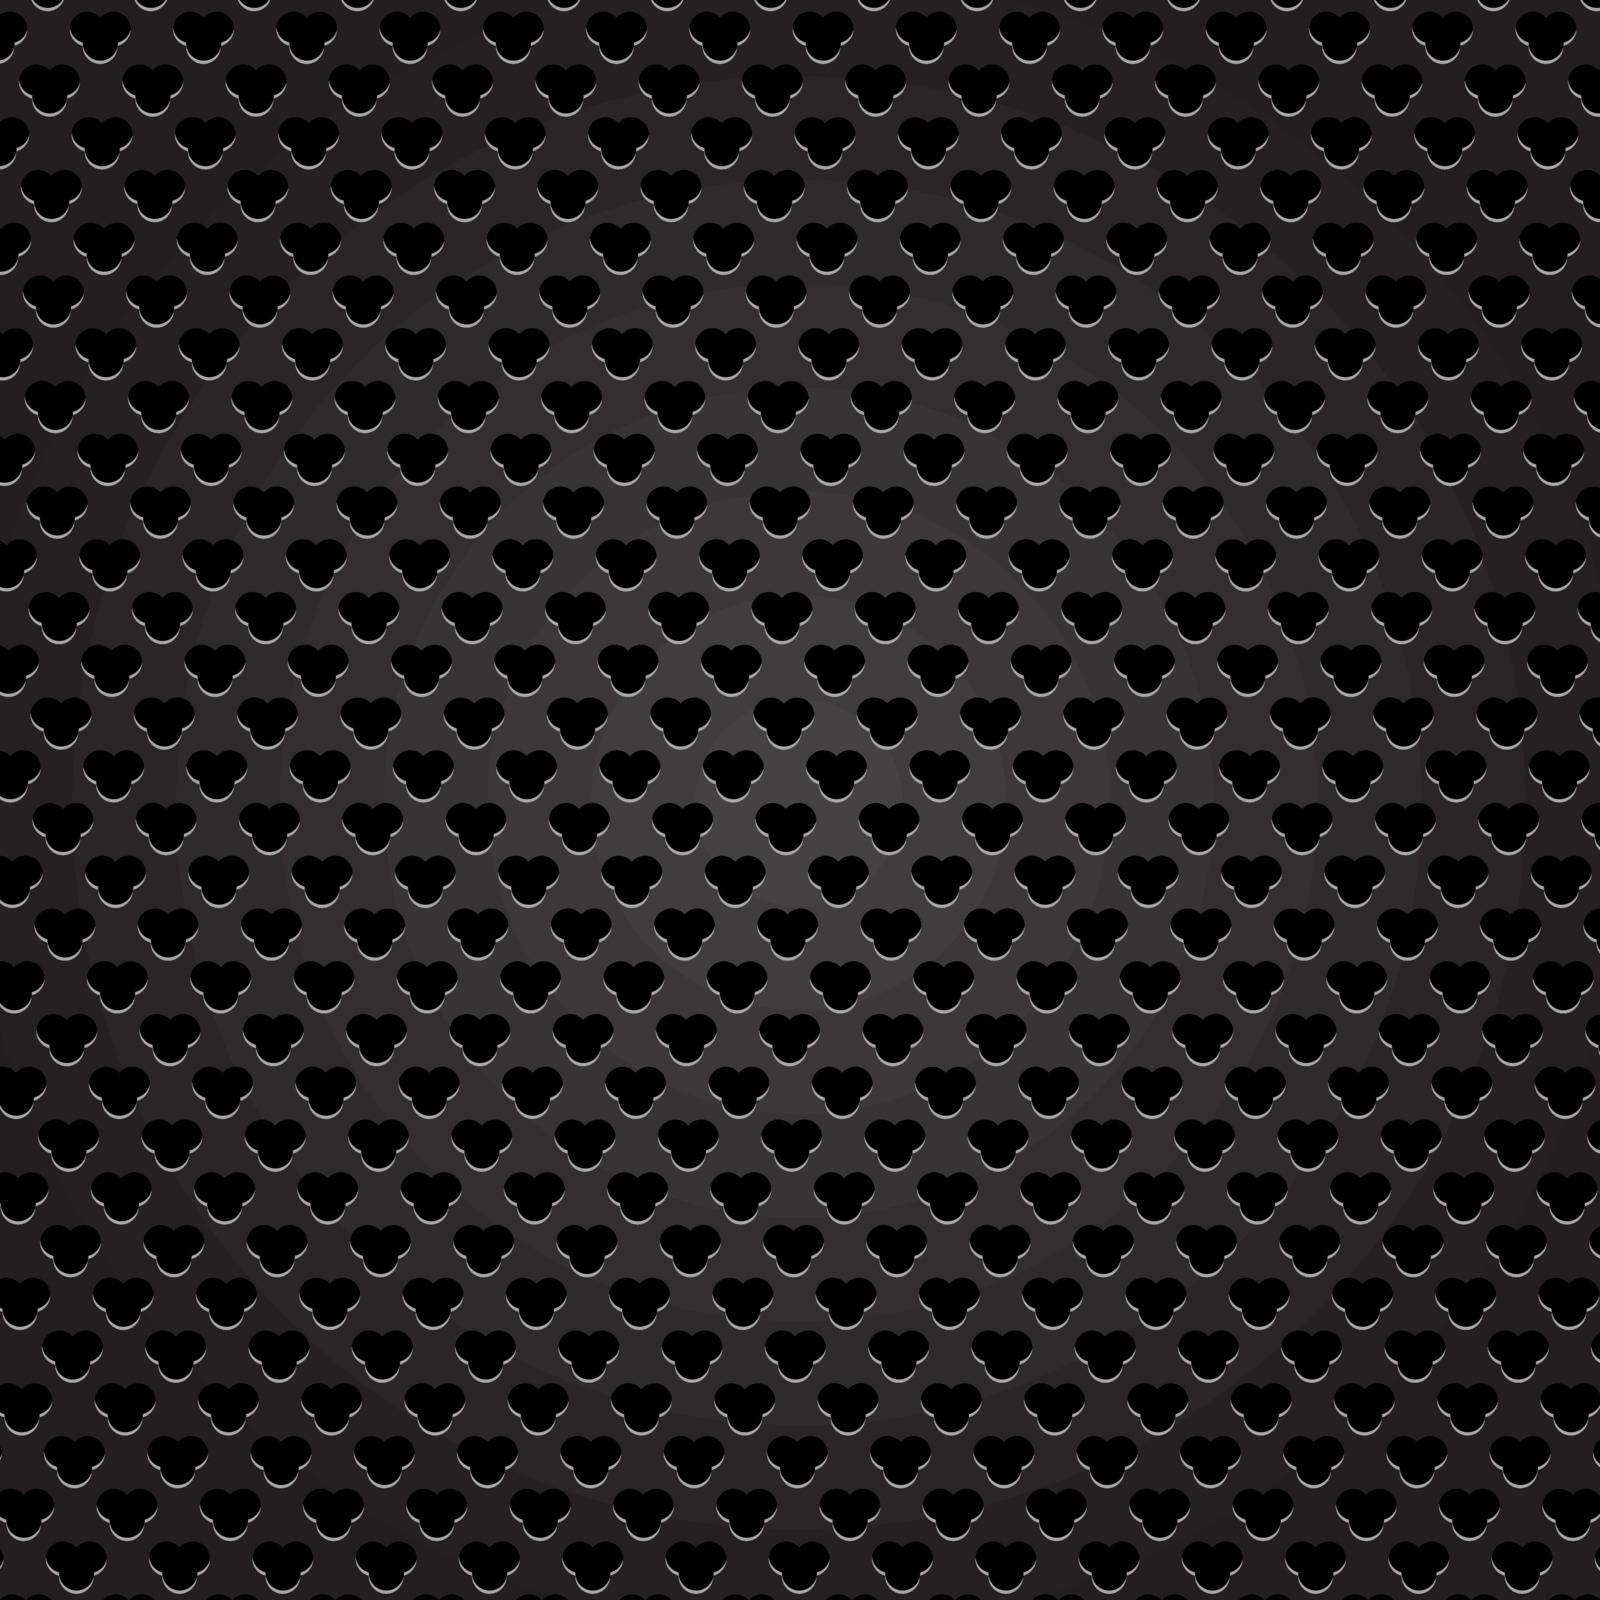 Iron Perforated Texture. Dark Metal Perforated Background.